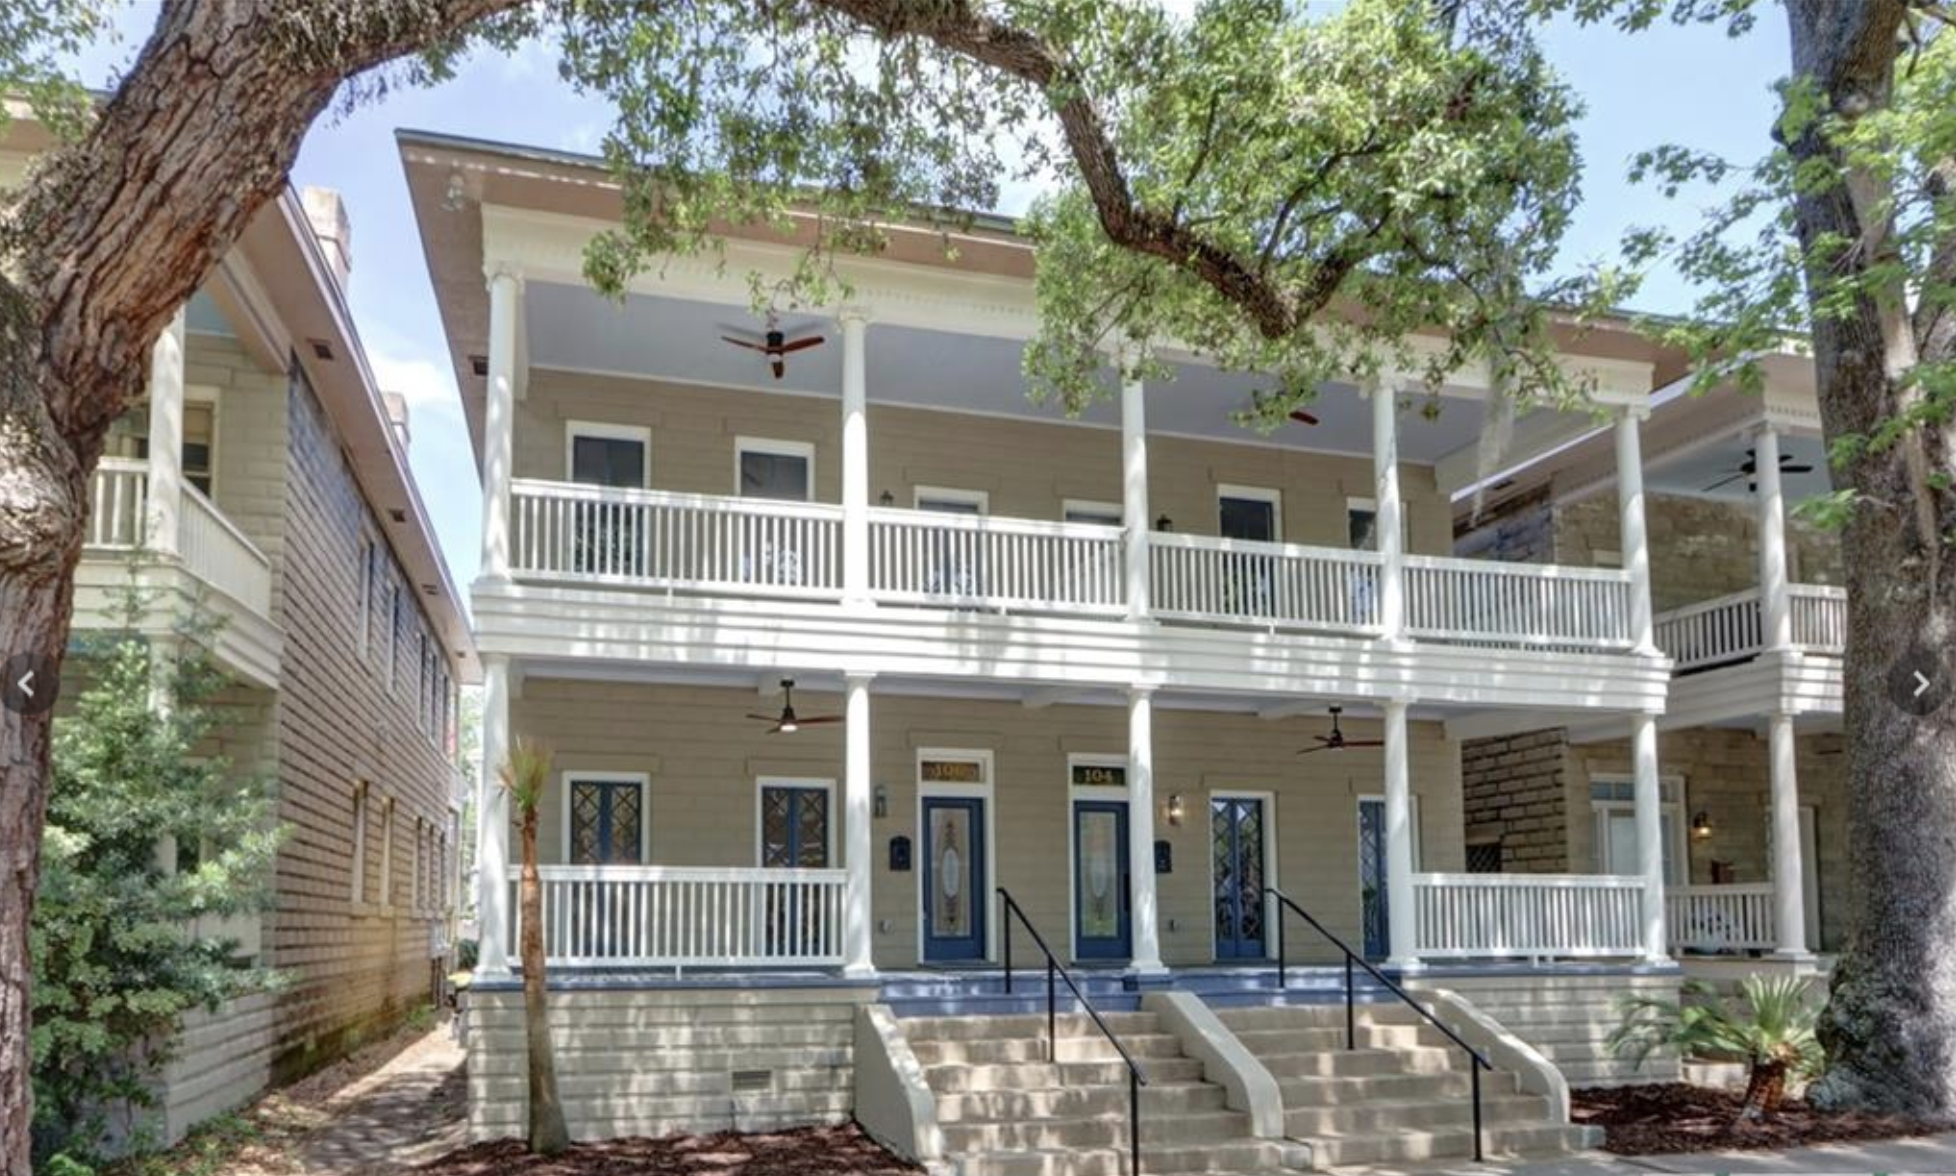 Featured image for “106 W 38th St. | Savannah, GA 31401”